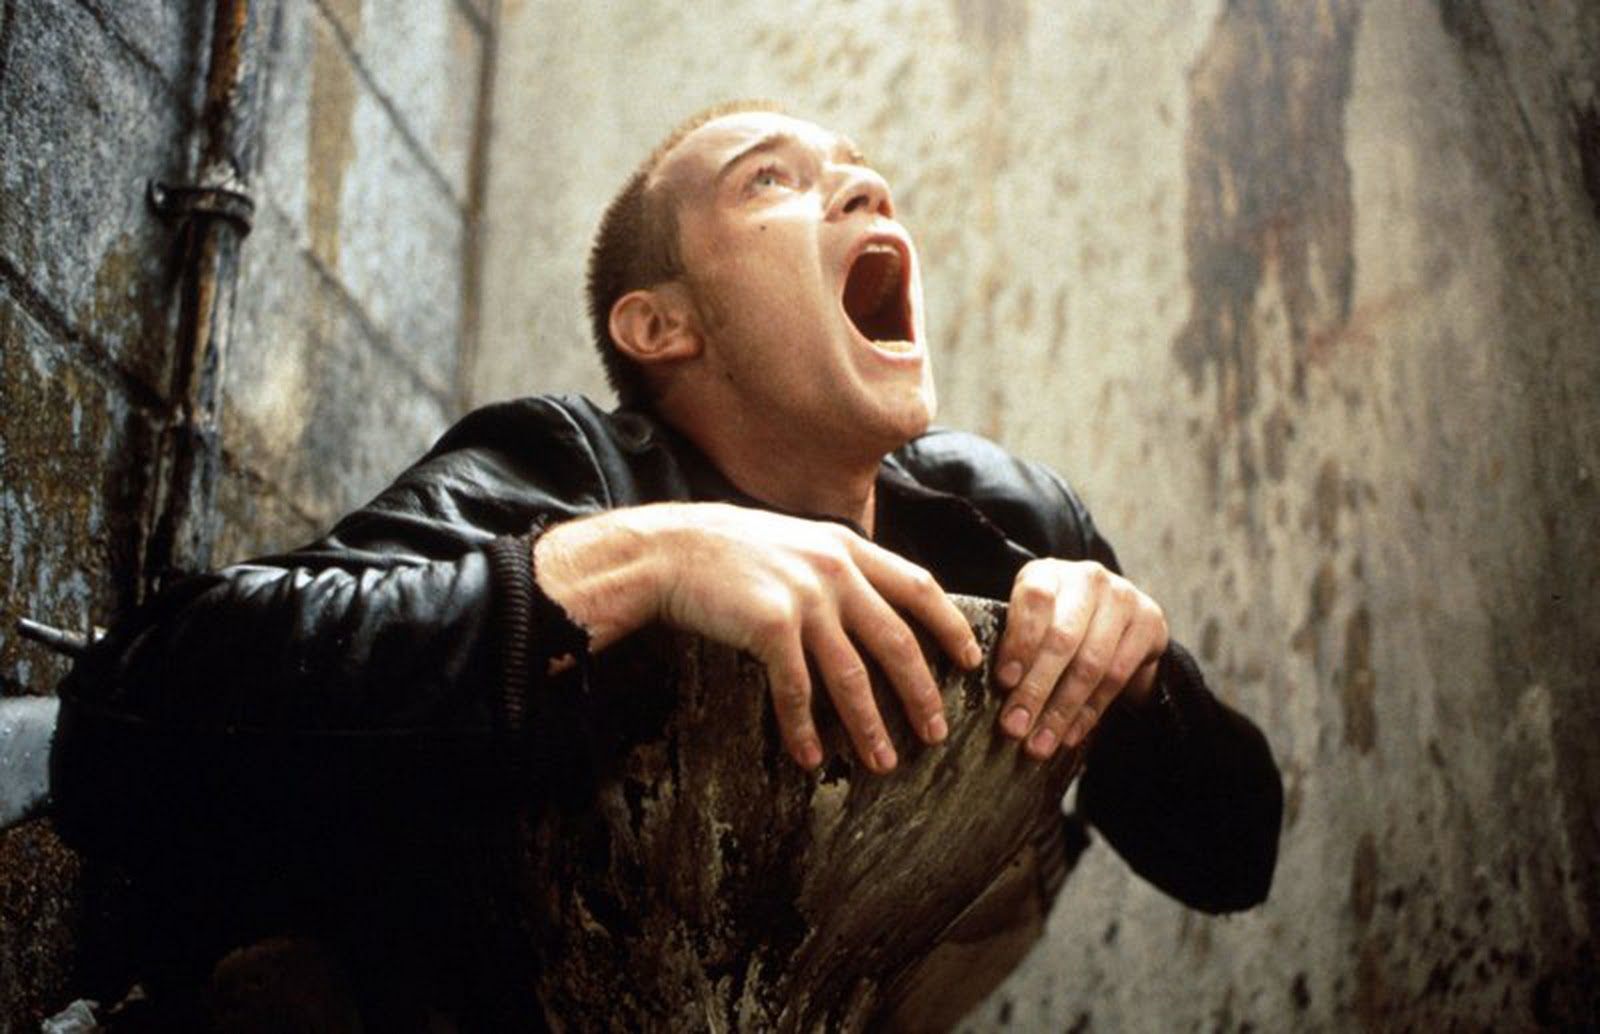 The faeces in the toilet scene from Trainspotting, were actu